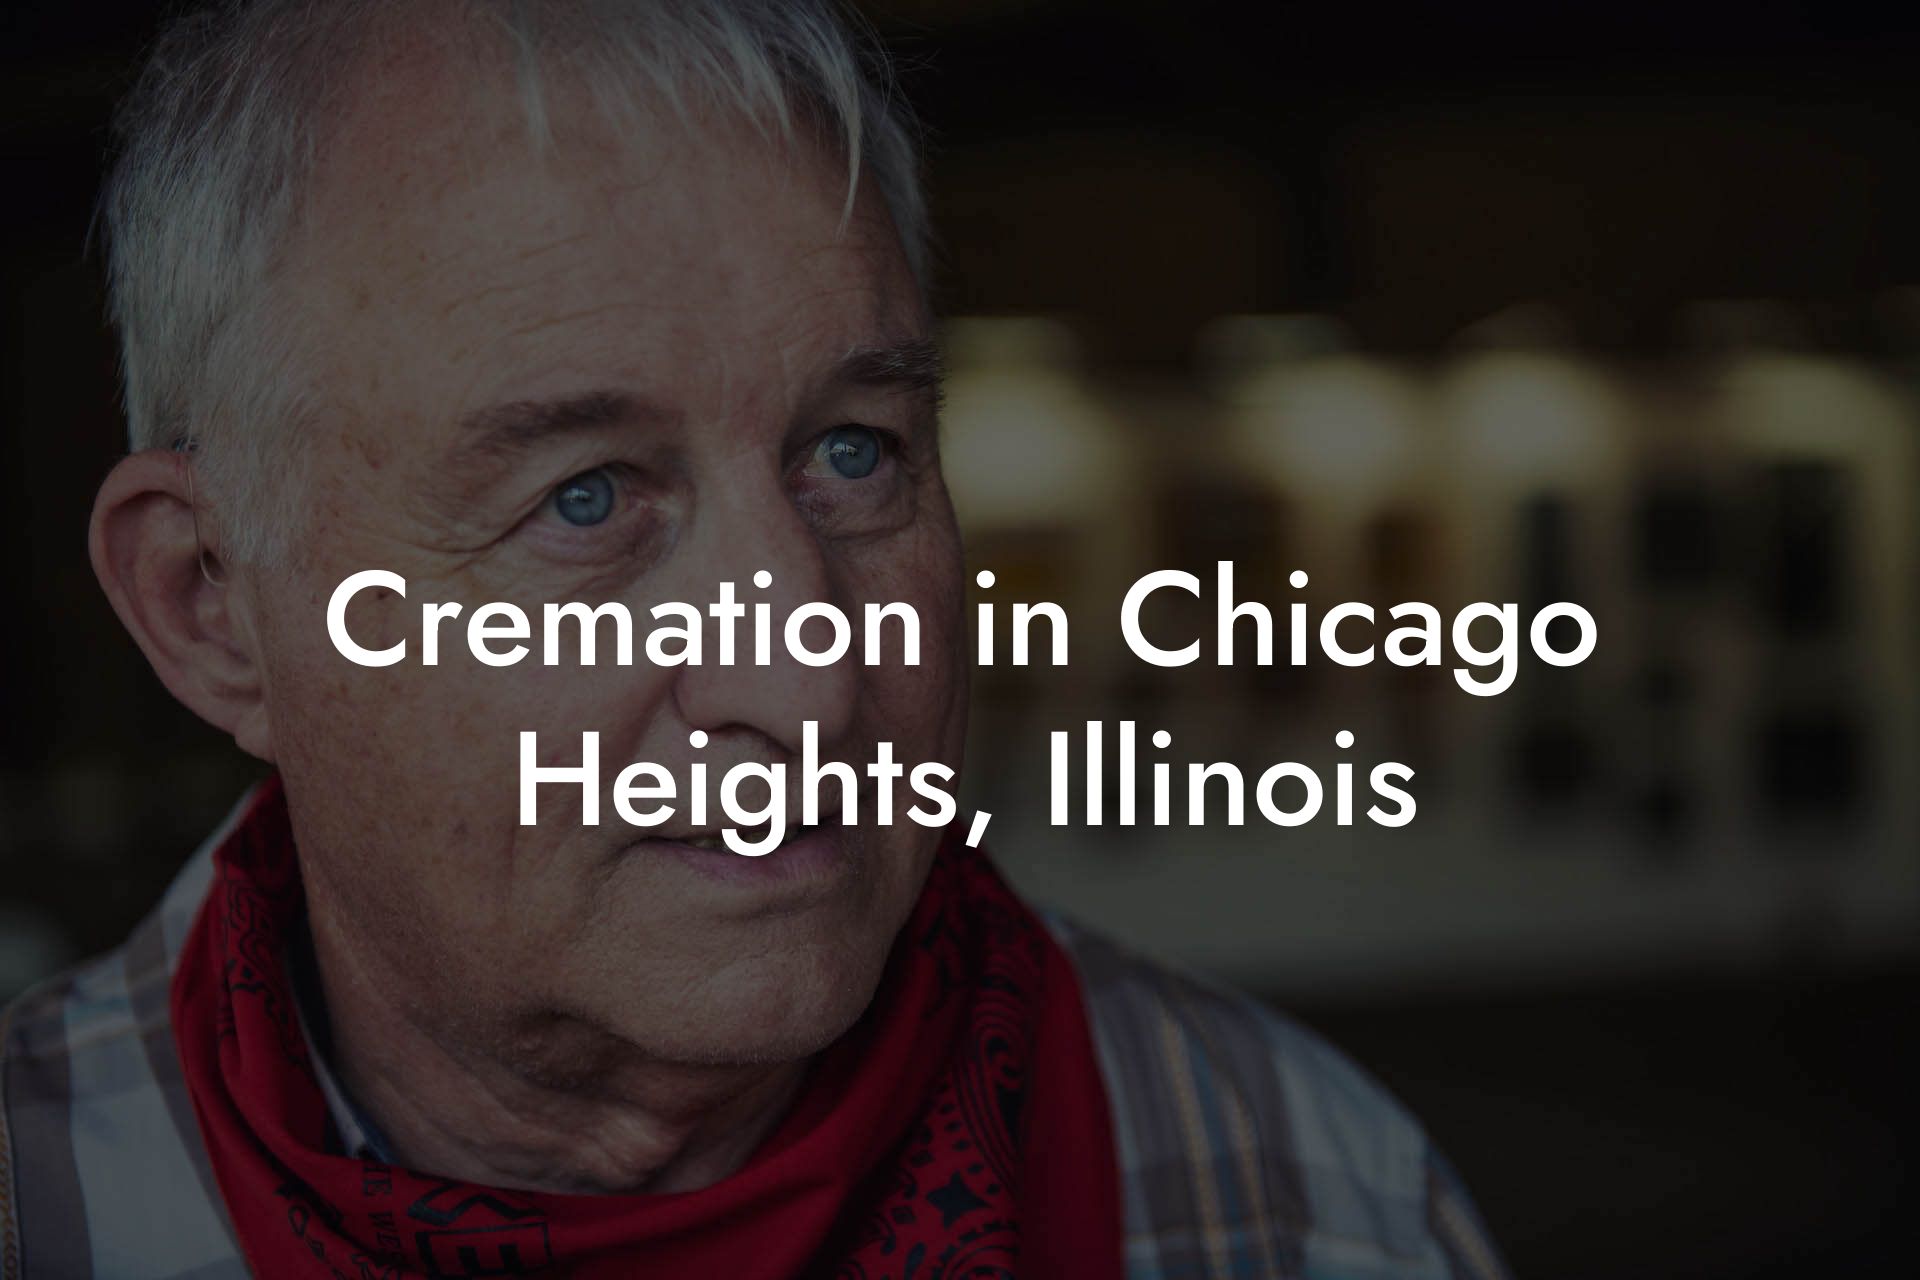 Cremation in Chicago Heights, Illinois